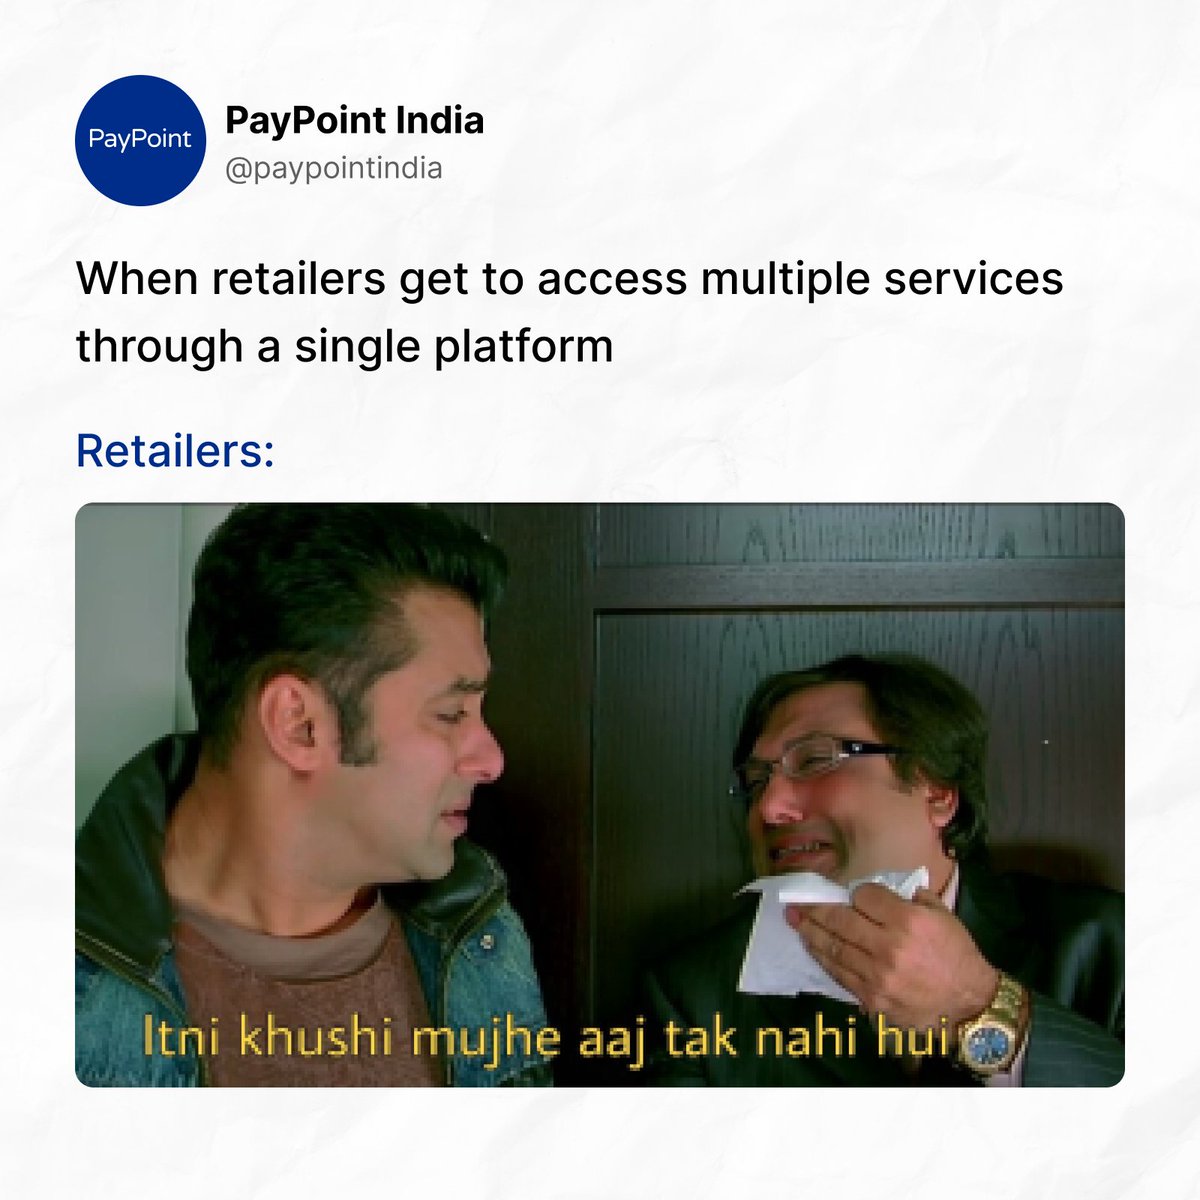 Become a PayPoint agent and unlock endless opportunities!

Expand your business and earn commissions by accessing multiple services, all through a single platform.

#PayPoint #HarPaymentDigital #DigitalIndia #FinancialInclusion #ExtraIncome #Meme